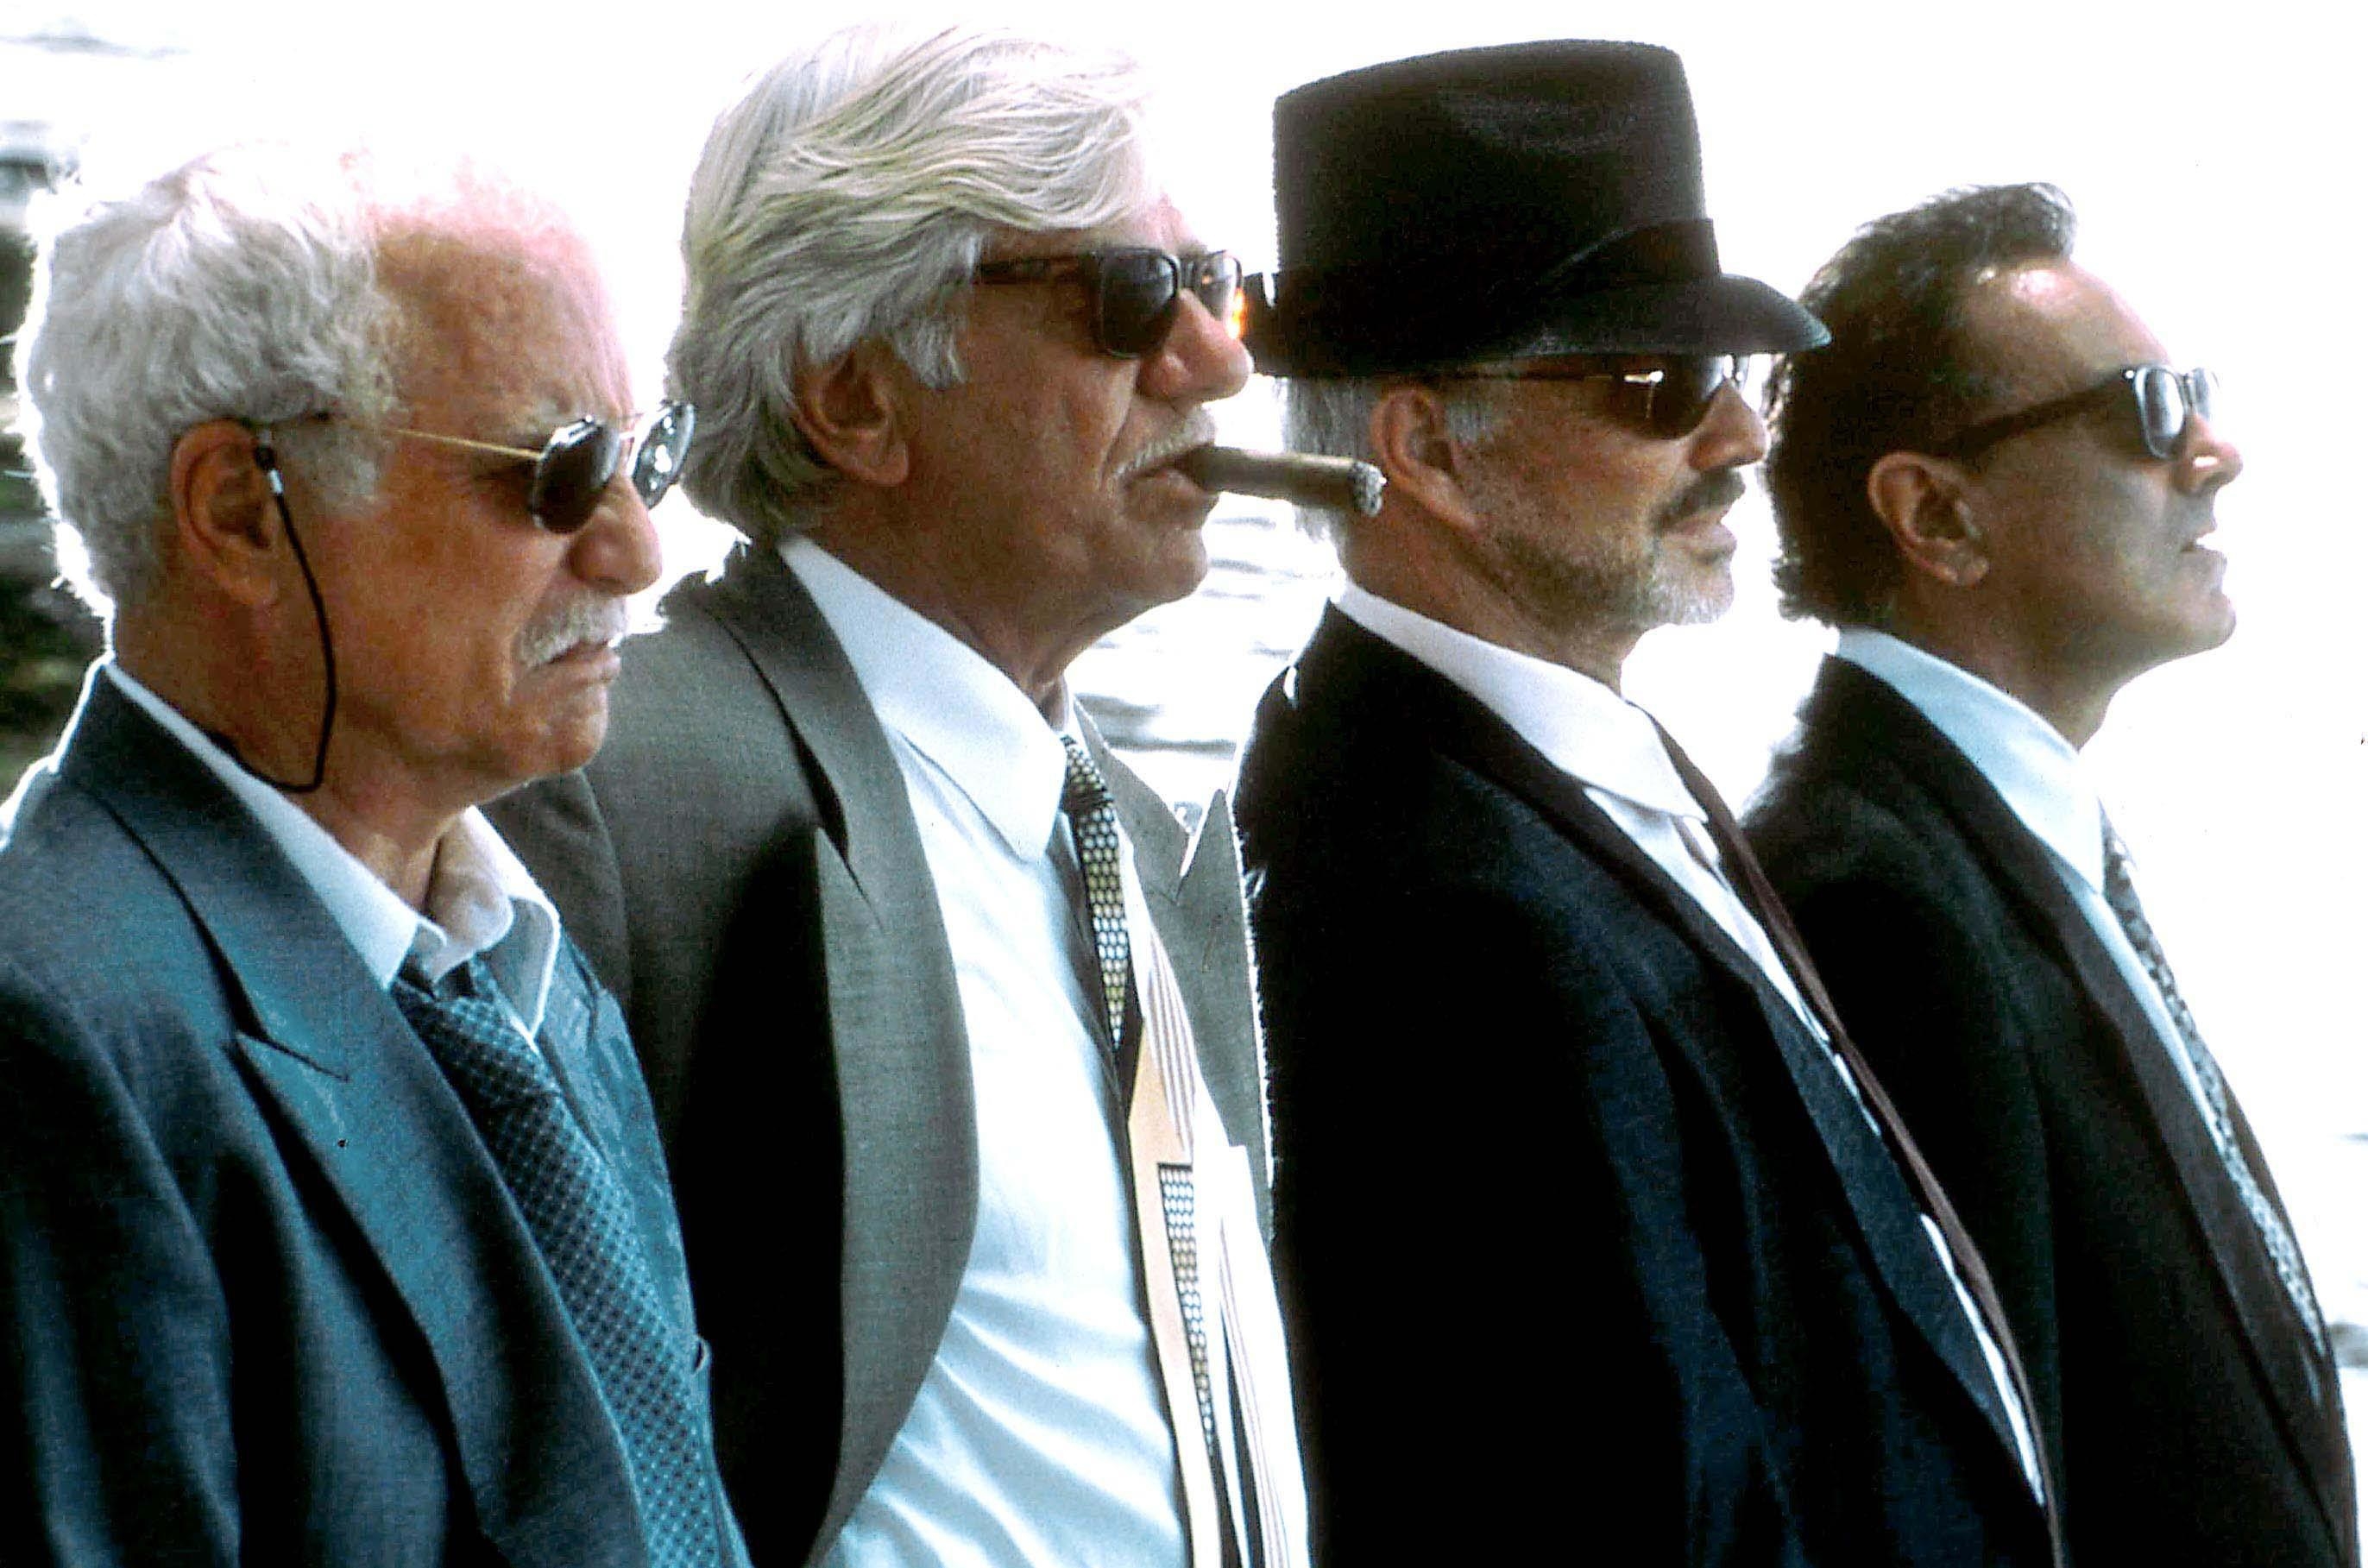 Four sharp-dressed senior men stare with grimaces into the distance